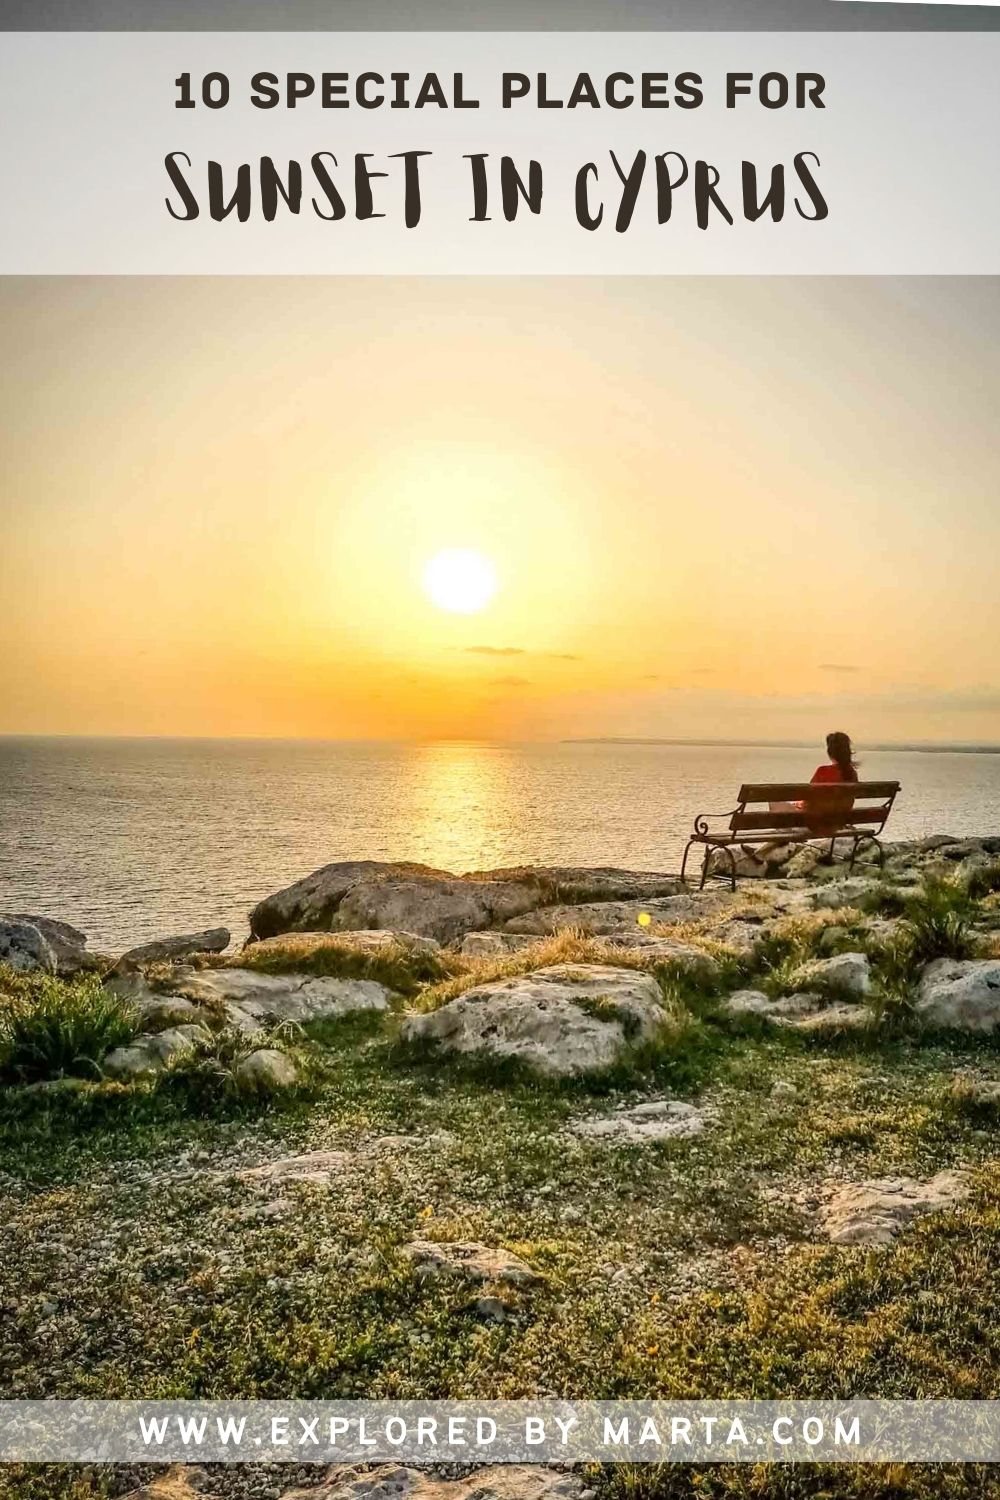 10 special places for sunset in Cyprus